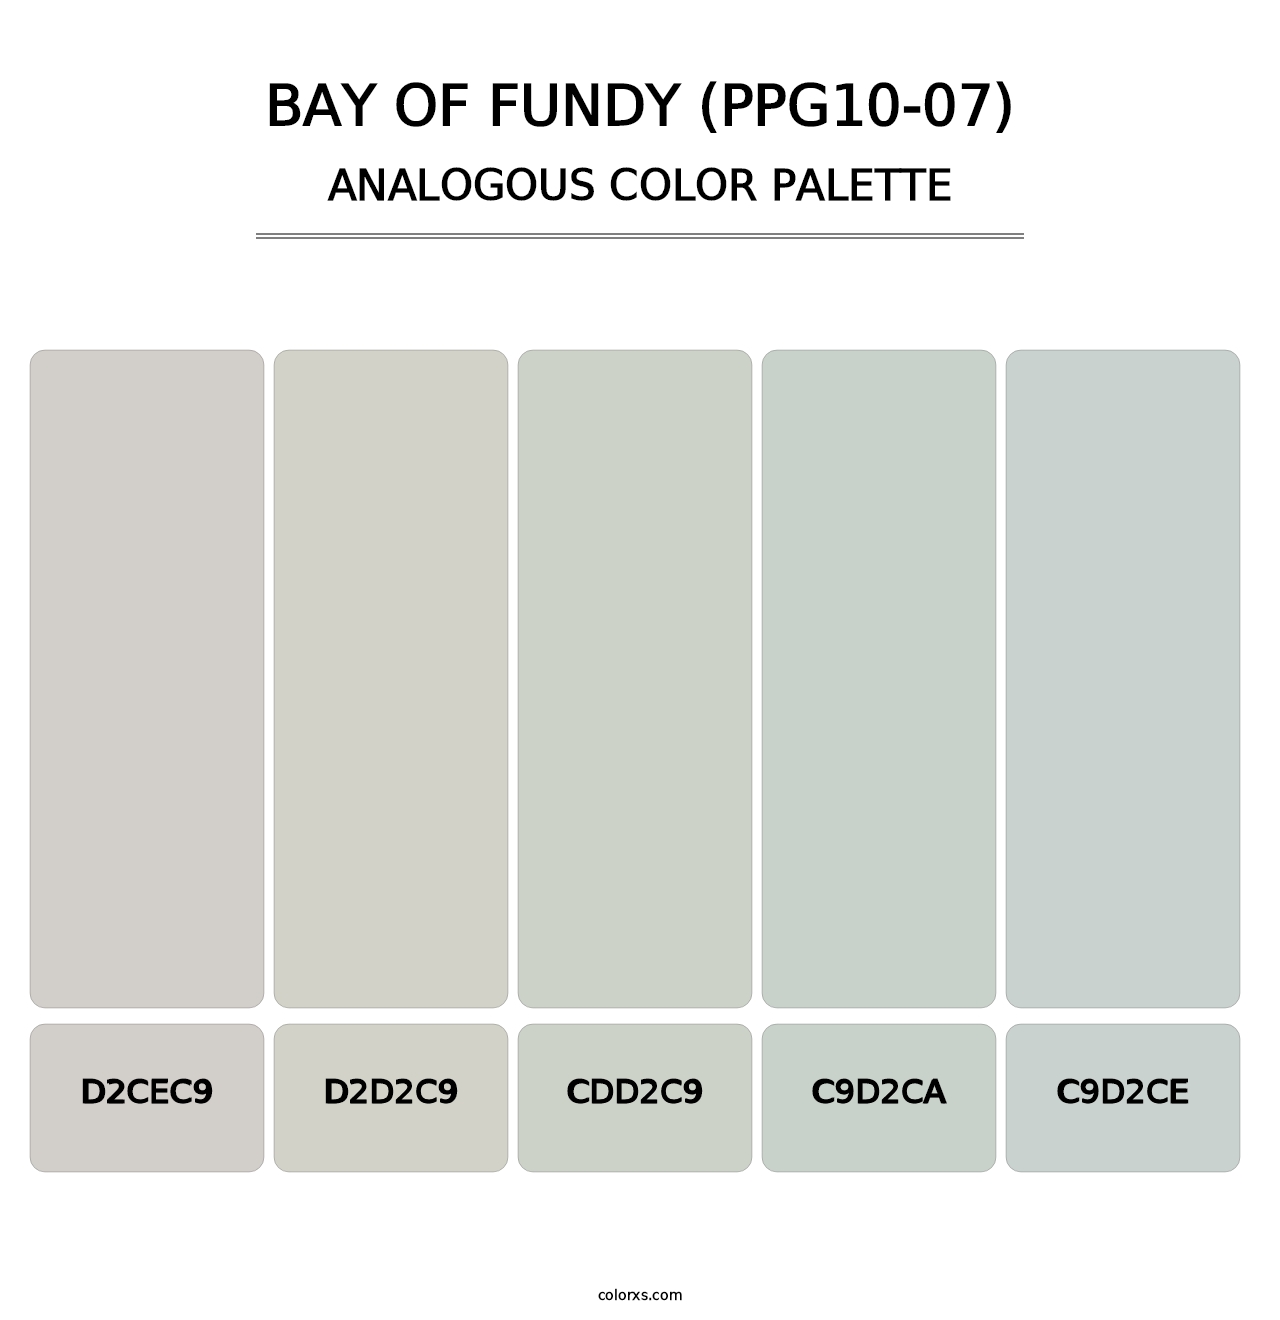 Bay Of Fundy (PPG10-07) - Analogous Color Palette